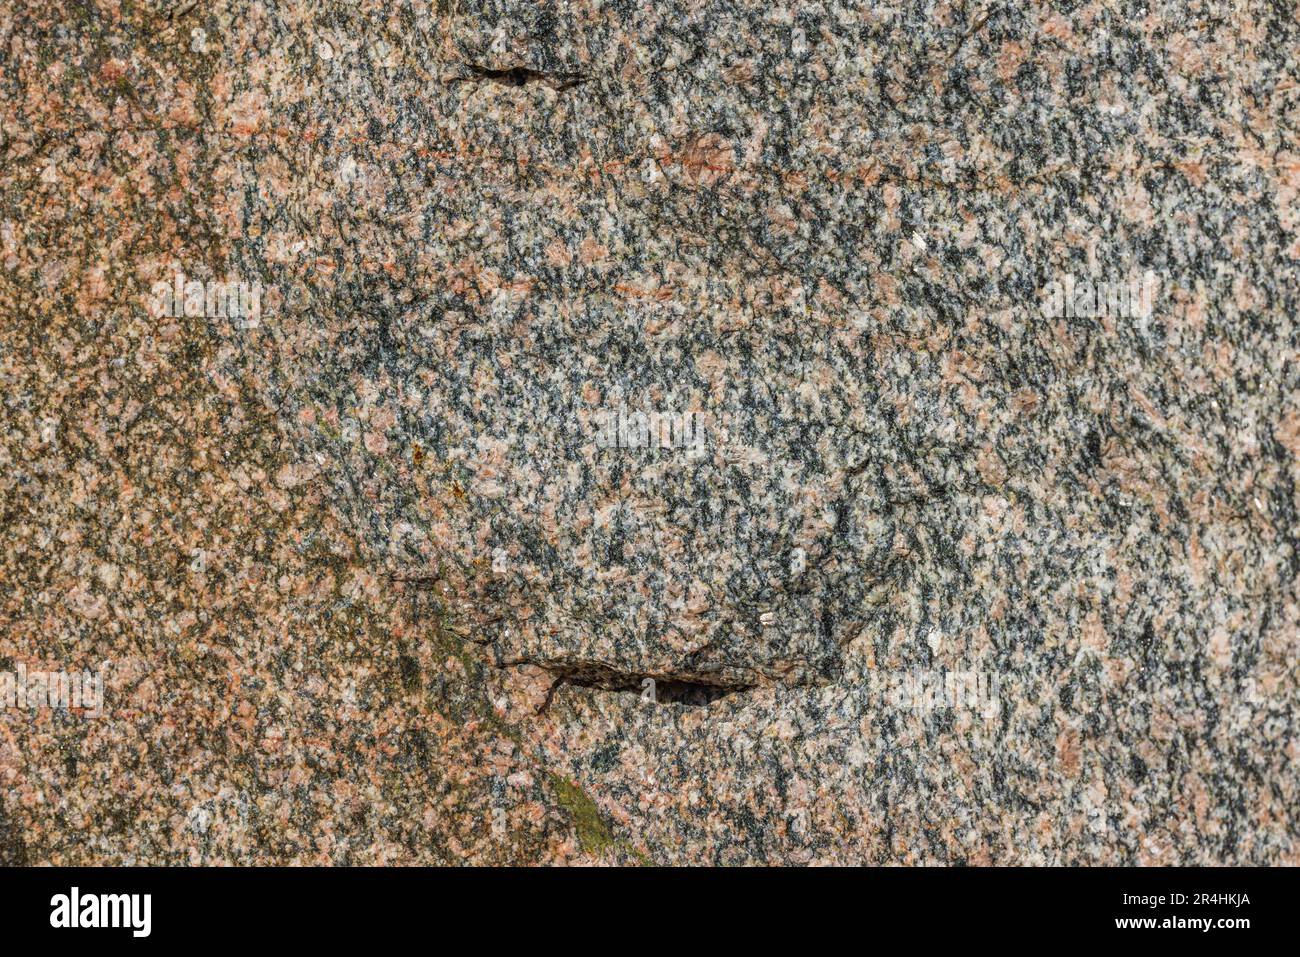 Close up view of brown-gray rock mountain texture. Beautiful nature backgrounds. Stock Photo